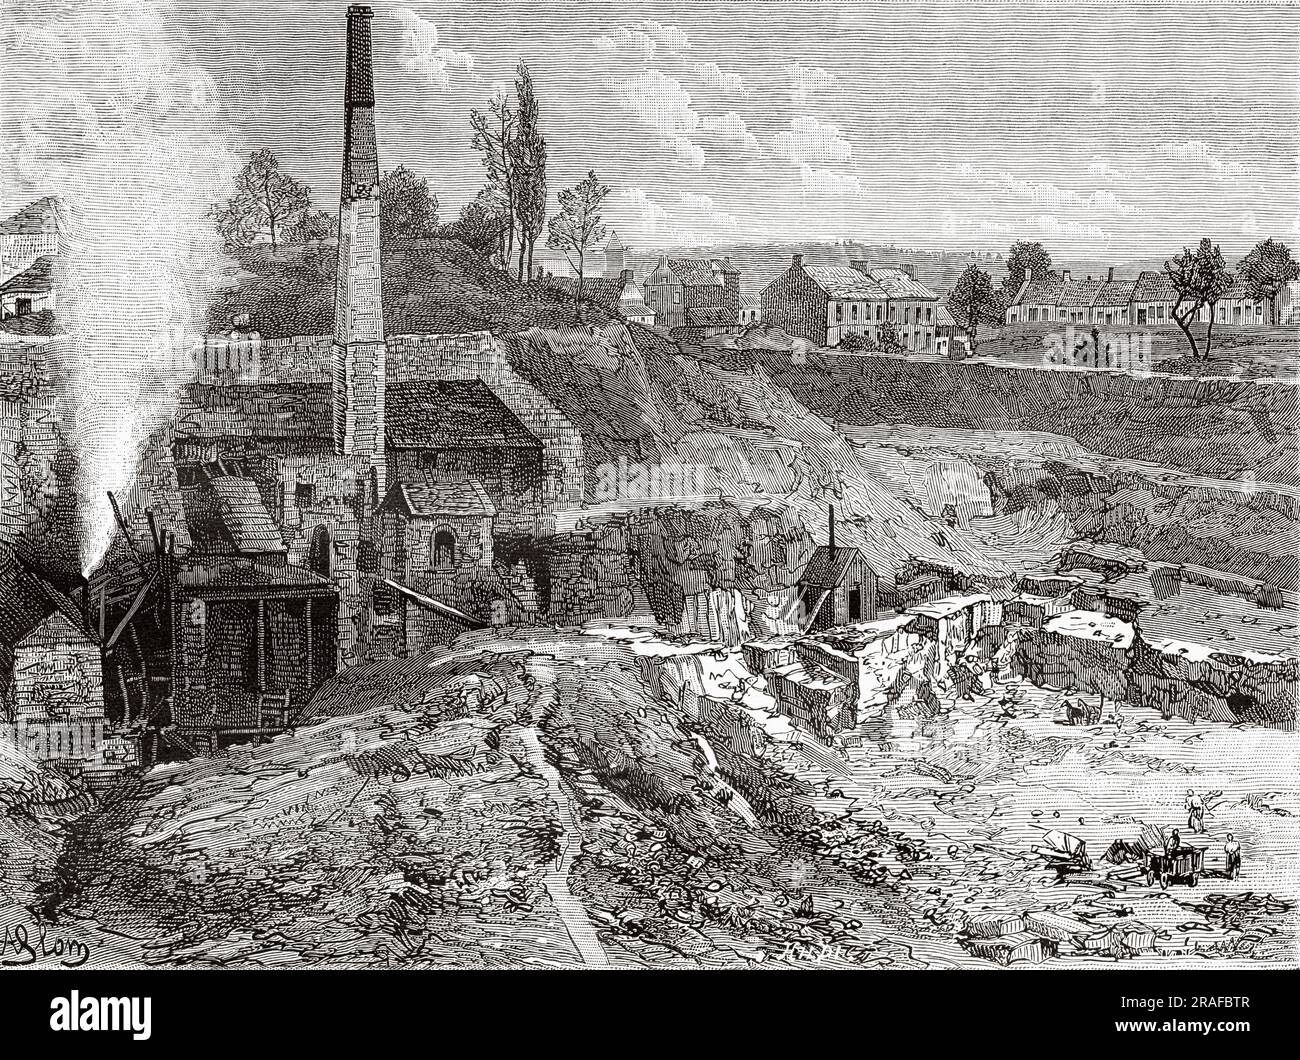 A quarry in Ecaussines, Hainaut province. Belgium, Europe. Journey to Belgium by Camille Lemonnier. Old 19th century engraving from Le Tour du Monde 1906 Stock Photo